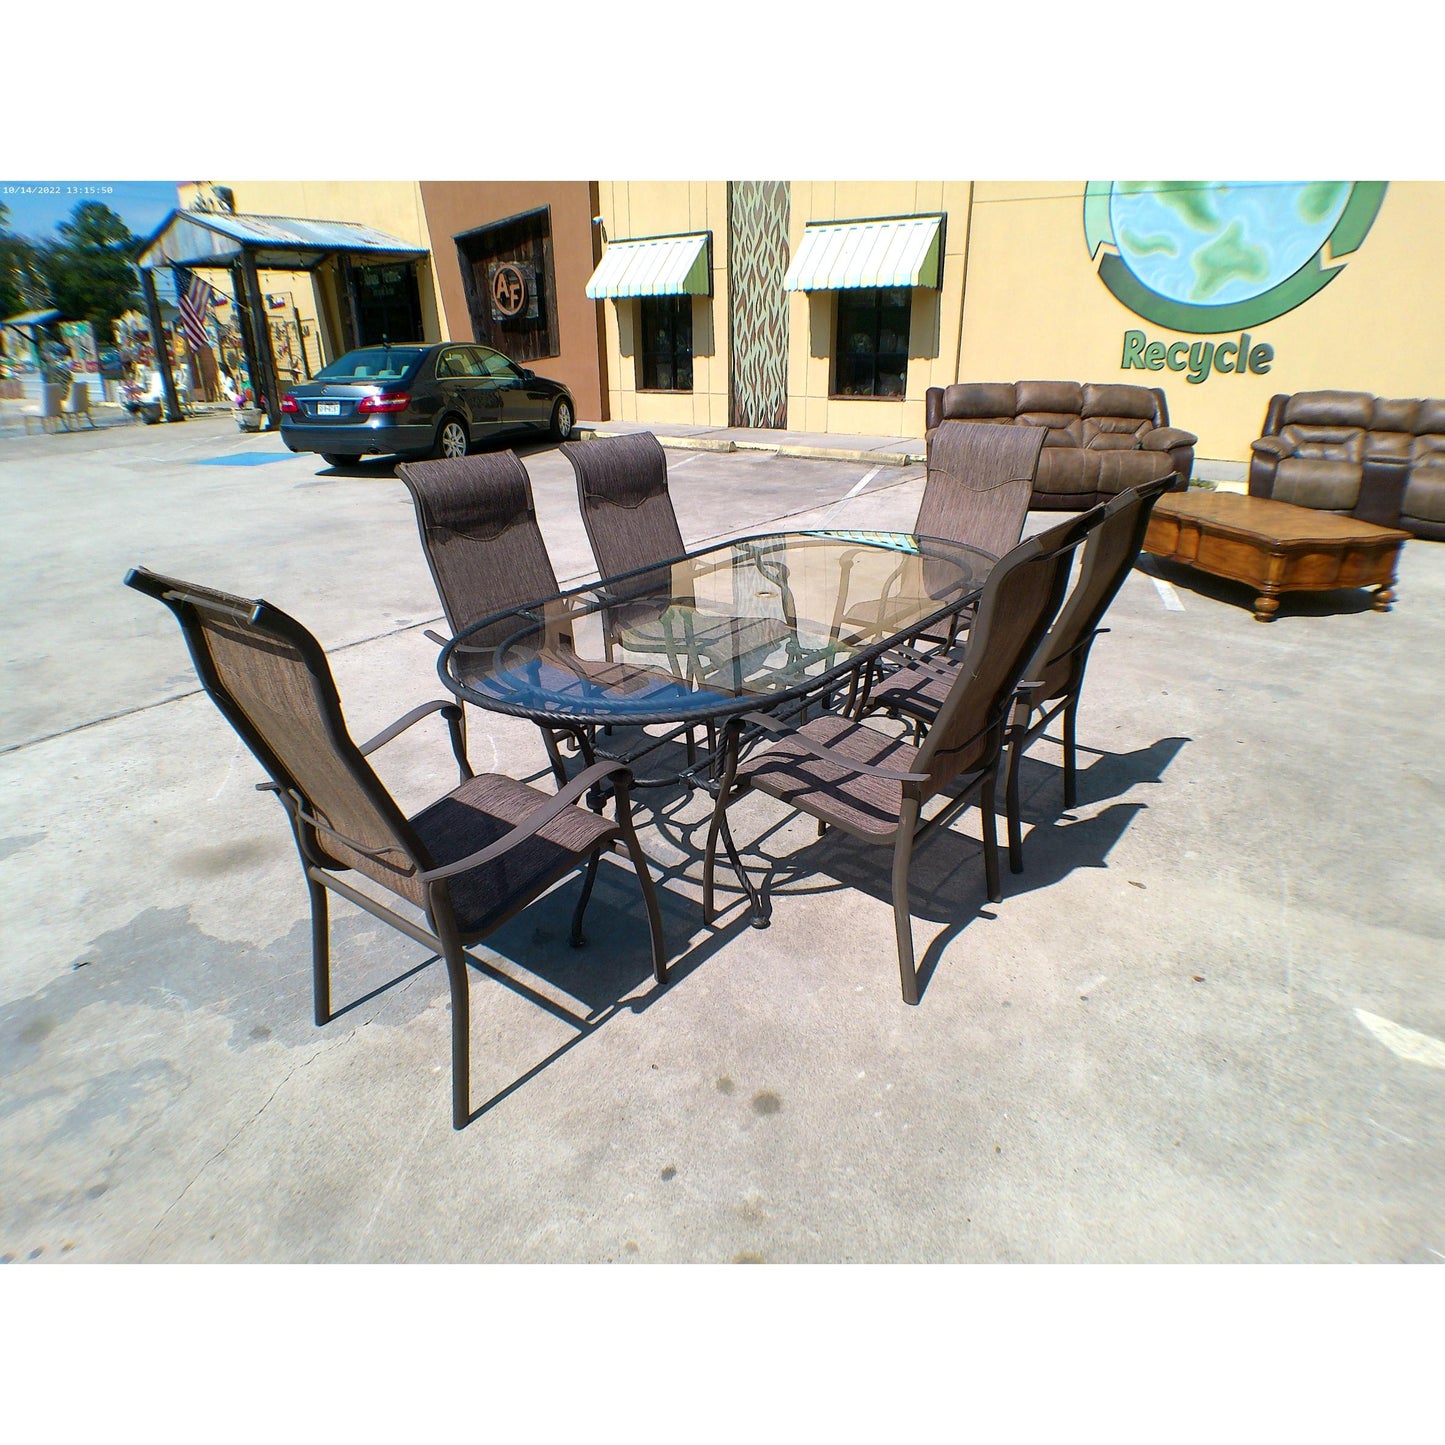 Patio Table w/ 6 Chairs